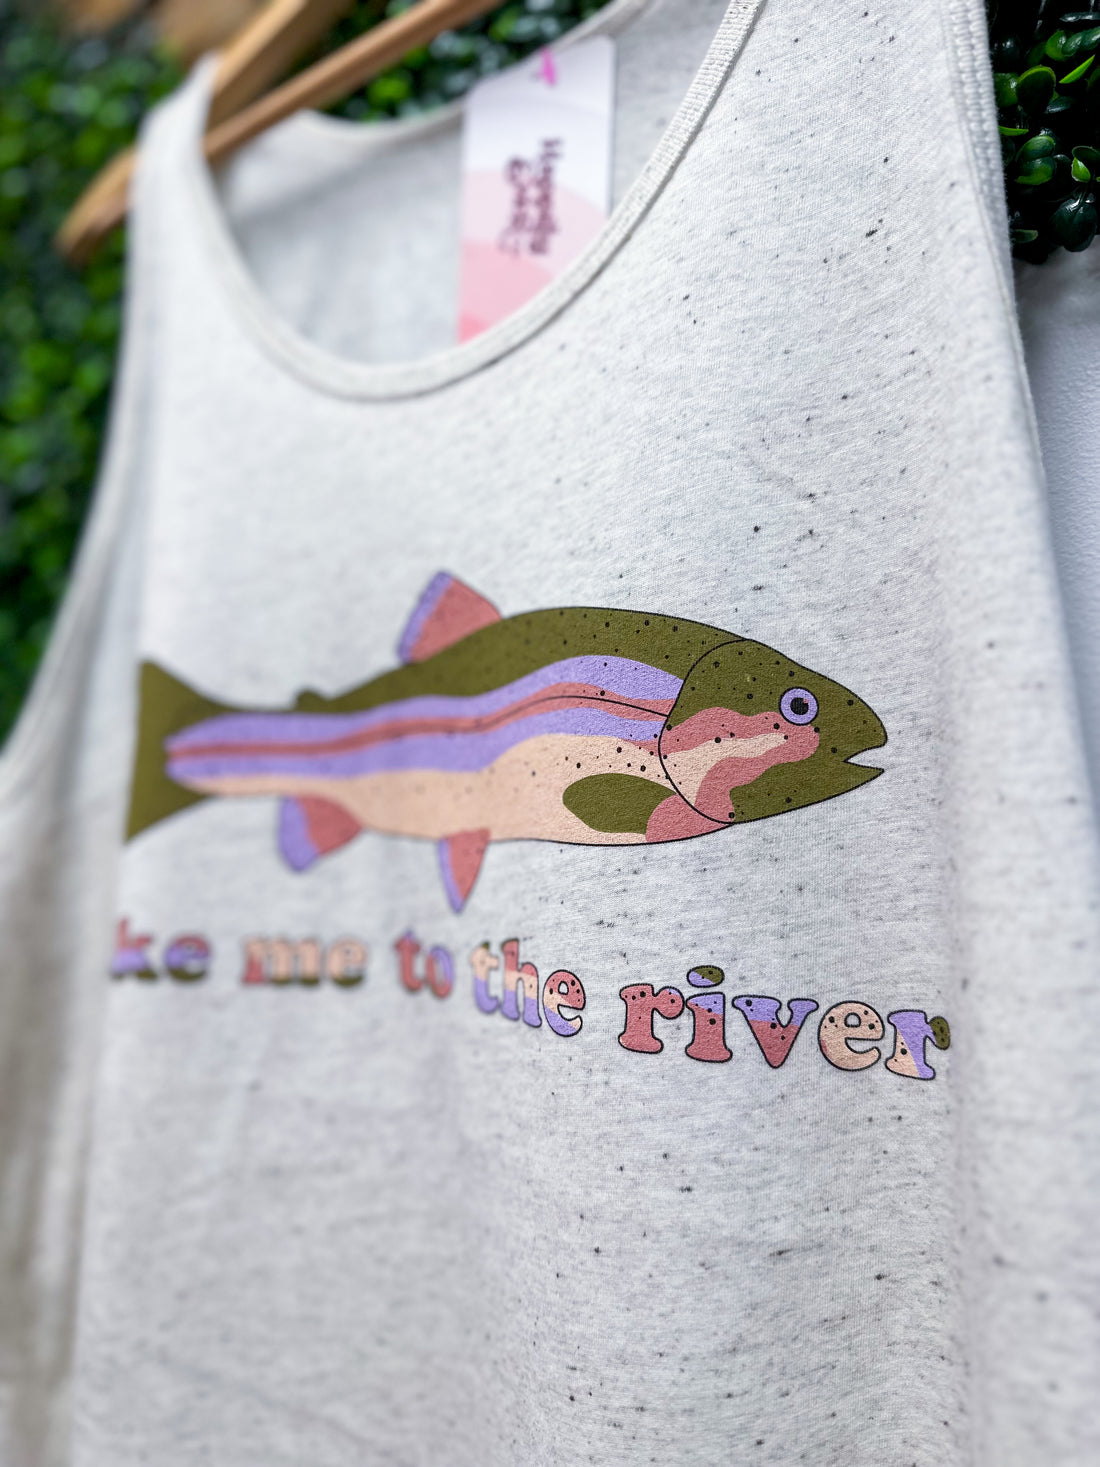 Take Me To The River Graphic Tank *FINAL SALE* XL ONLY!**